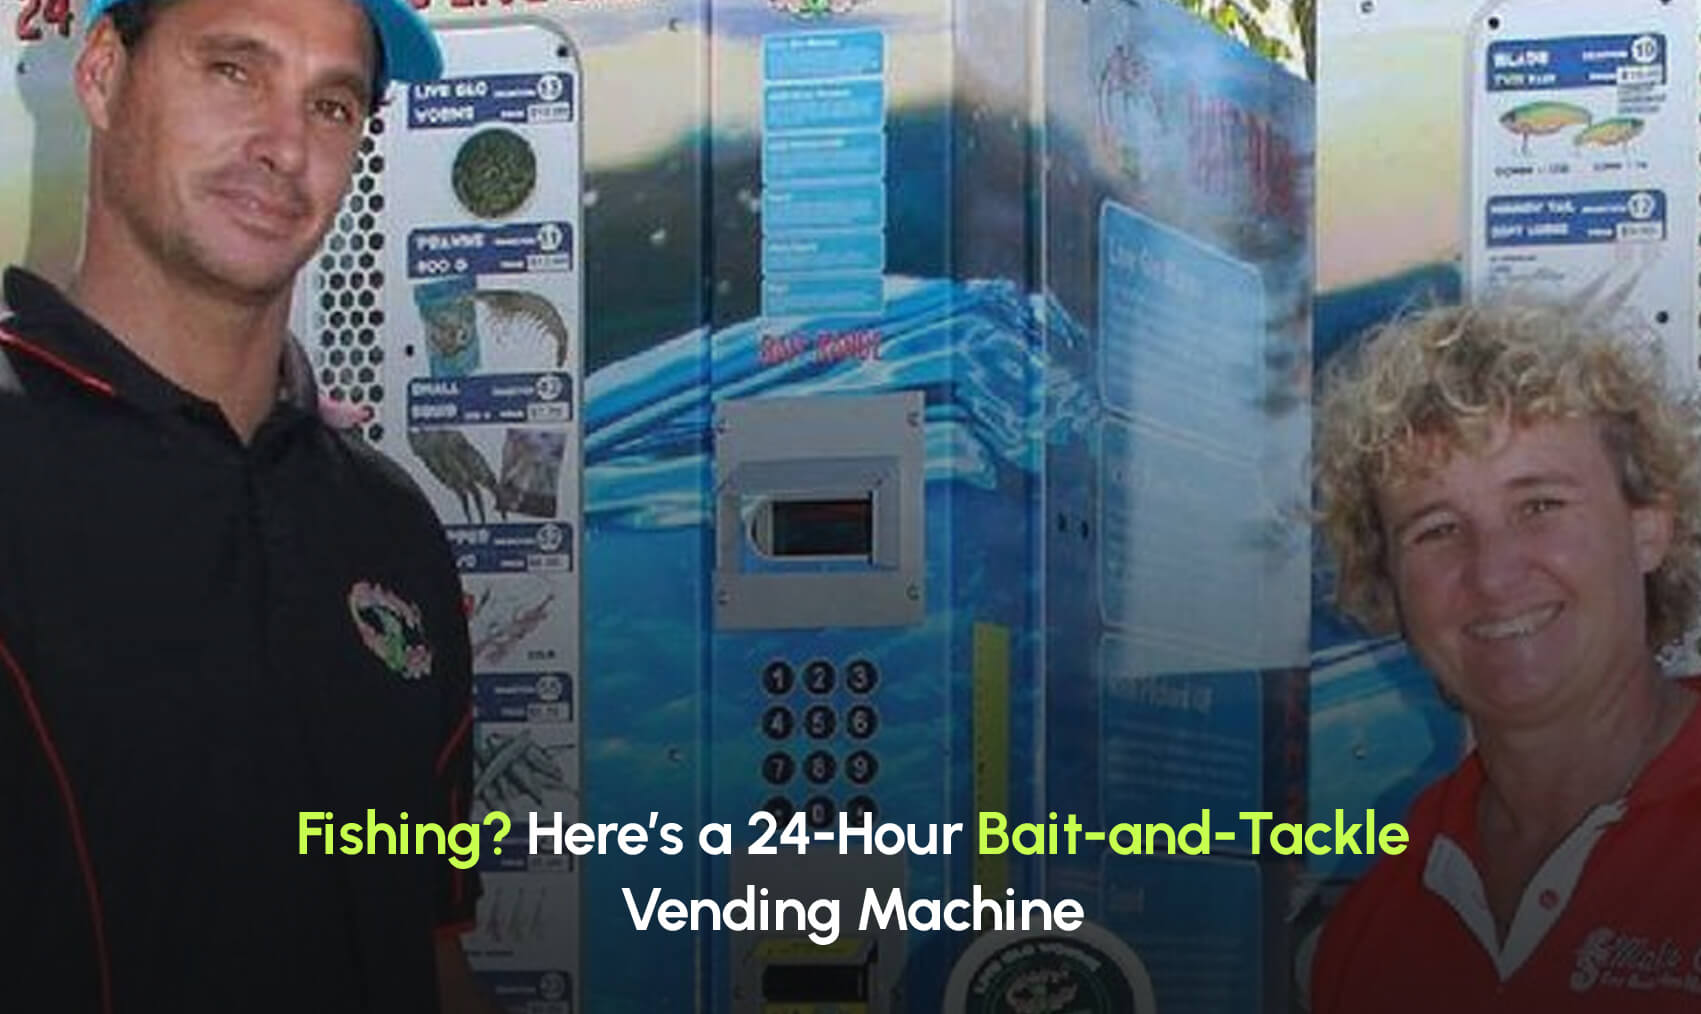 Innovative Vending Machines: 24-Hour Bait-and-Tackle